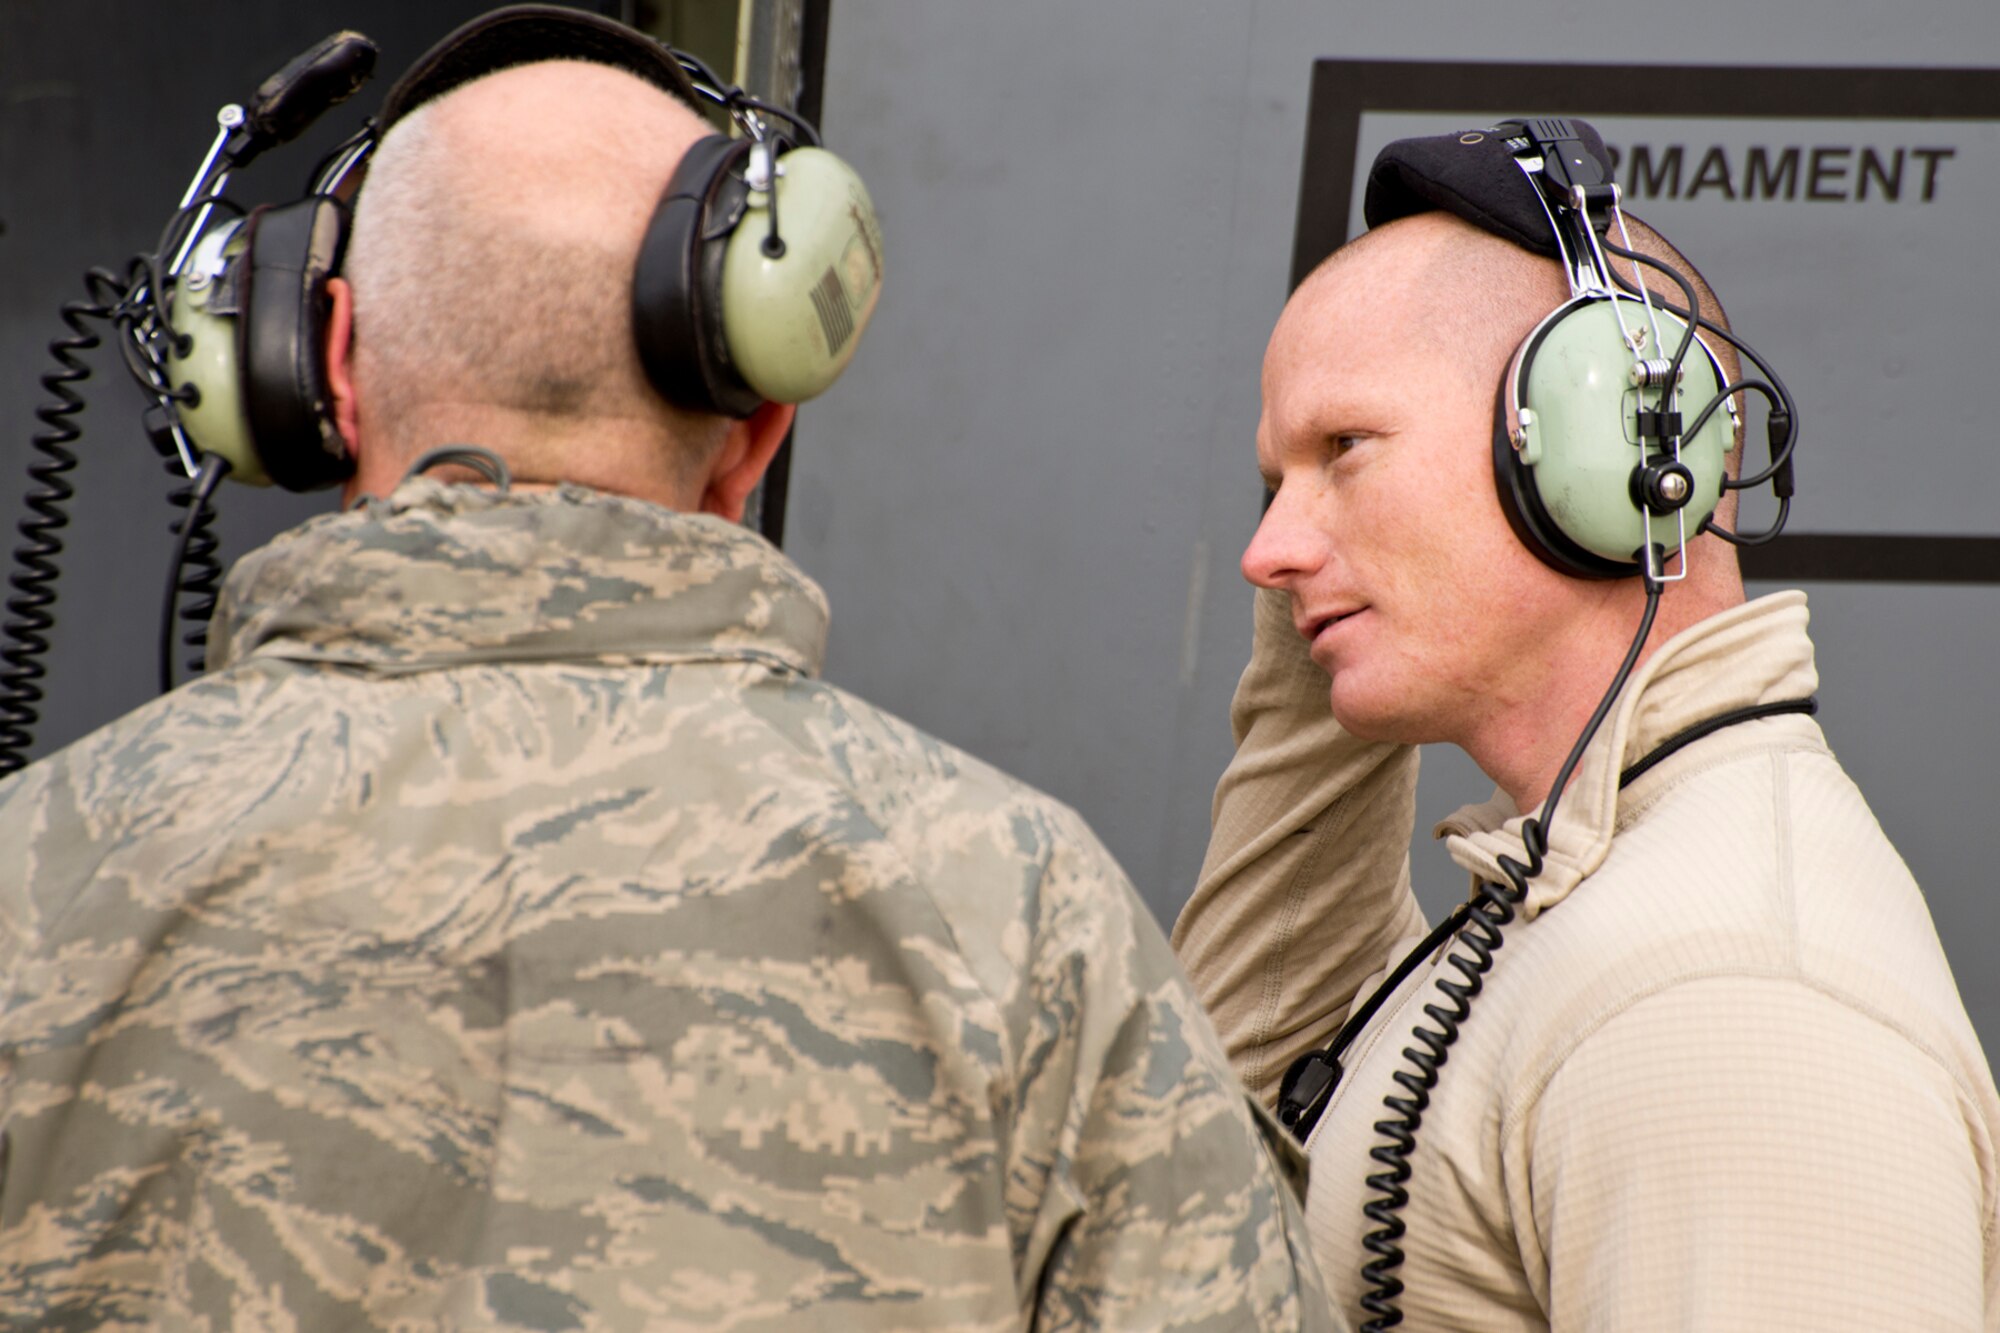 (From Right) U.S. Air Force Master Sgt. Steven Lessard and Tech. Sgt. David Chismark, discuss maintenance issues on the flightline at Little Rock Air Force Base, Ark., Dec. 1, 2015. Both crew chiefs are assigned to the 913th Maintenance Squadron, and always ensure their planes are ready to complete the Air Force’s world-wide missions. (U.S. Air Force photo by Master Sgt. Jeff Walston/Released)  